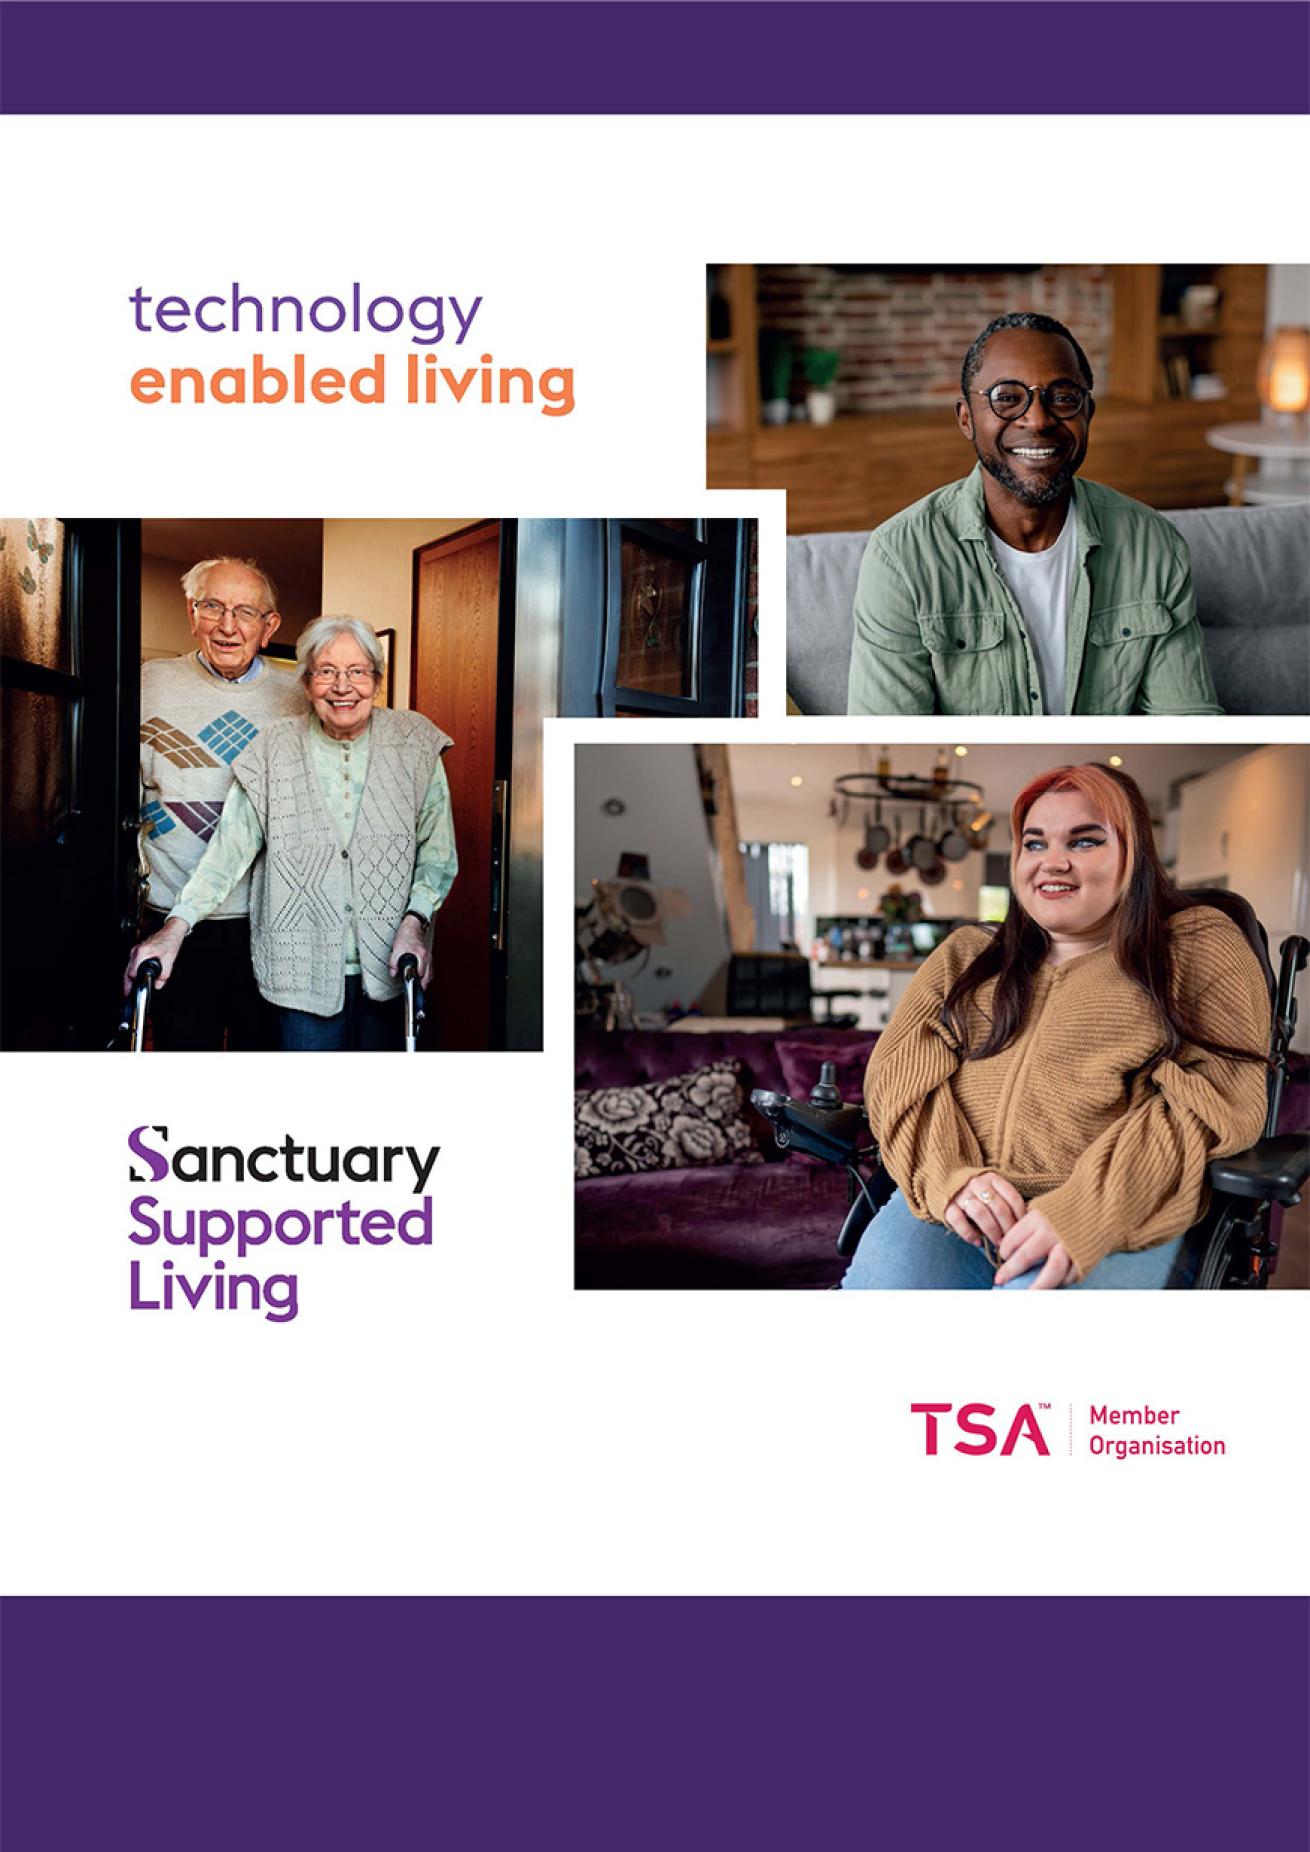 Front cover of the technology enabled living brochure